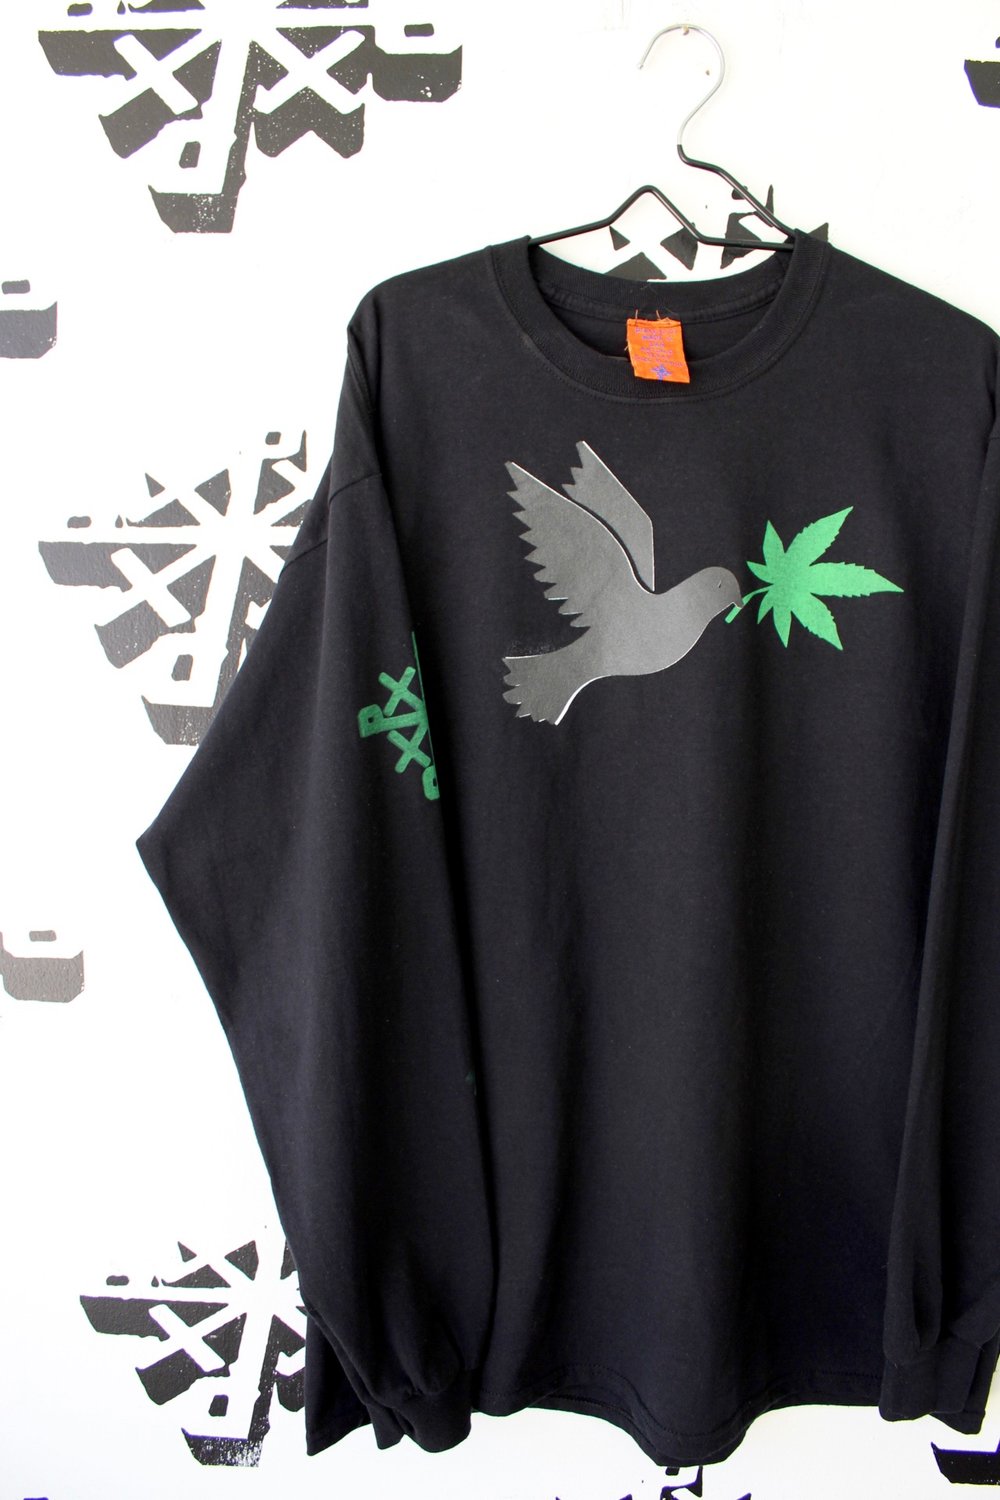 weed over there tee long sleeve in black 